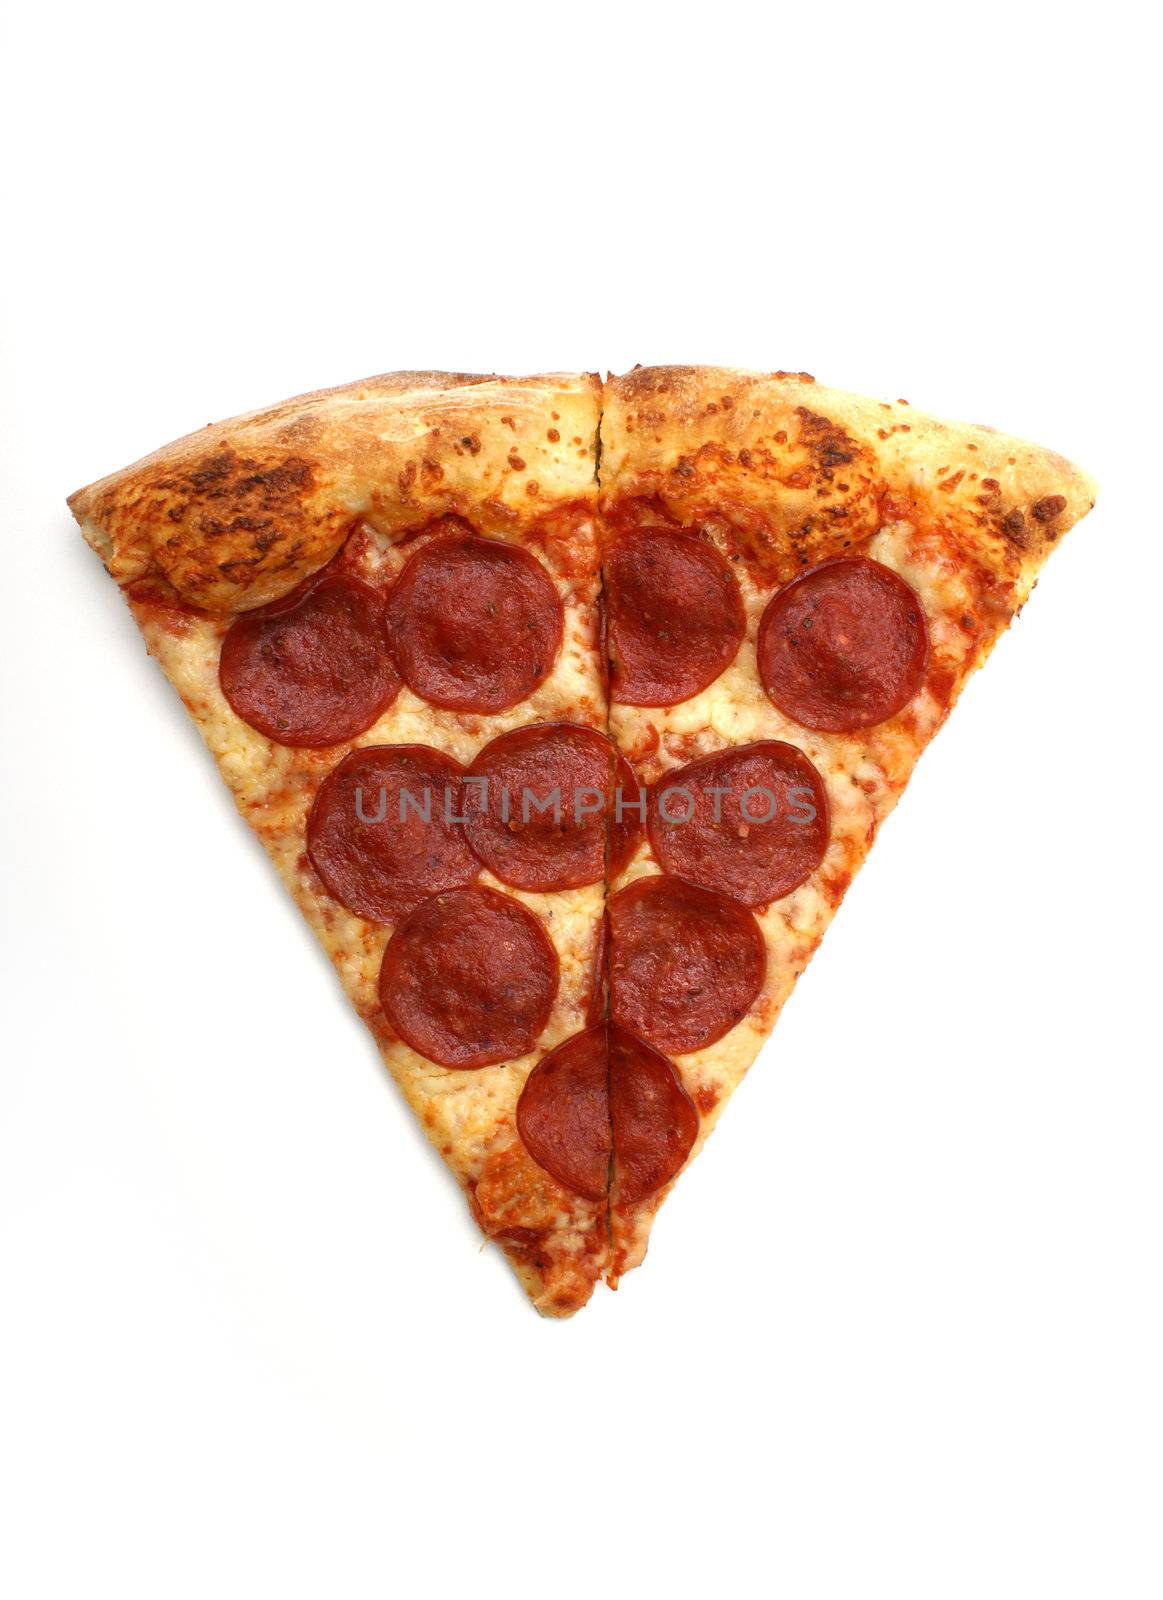 A slice of pepperoni pizza on white background.